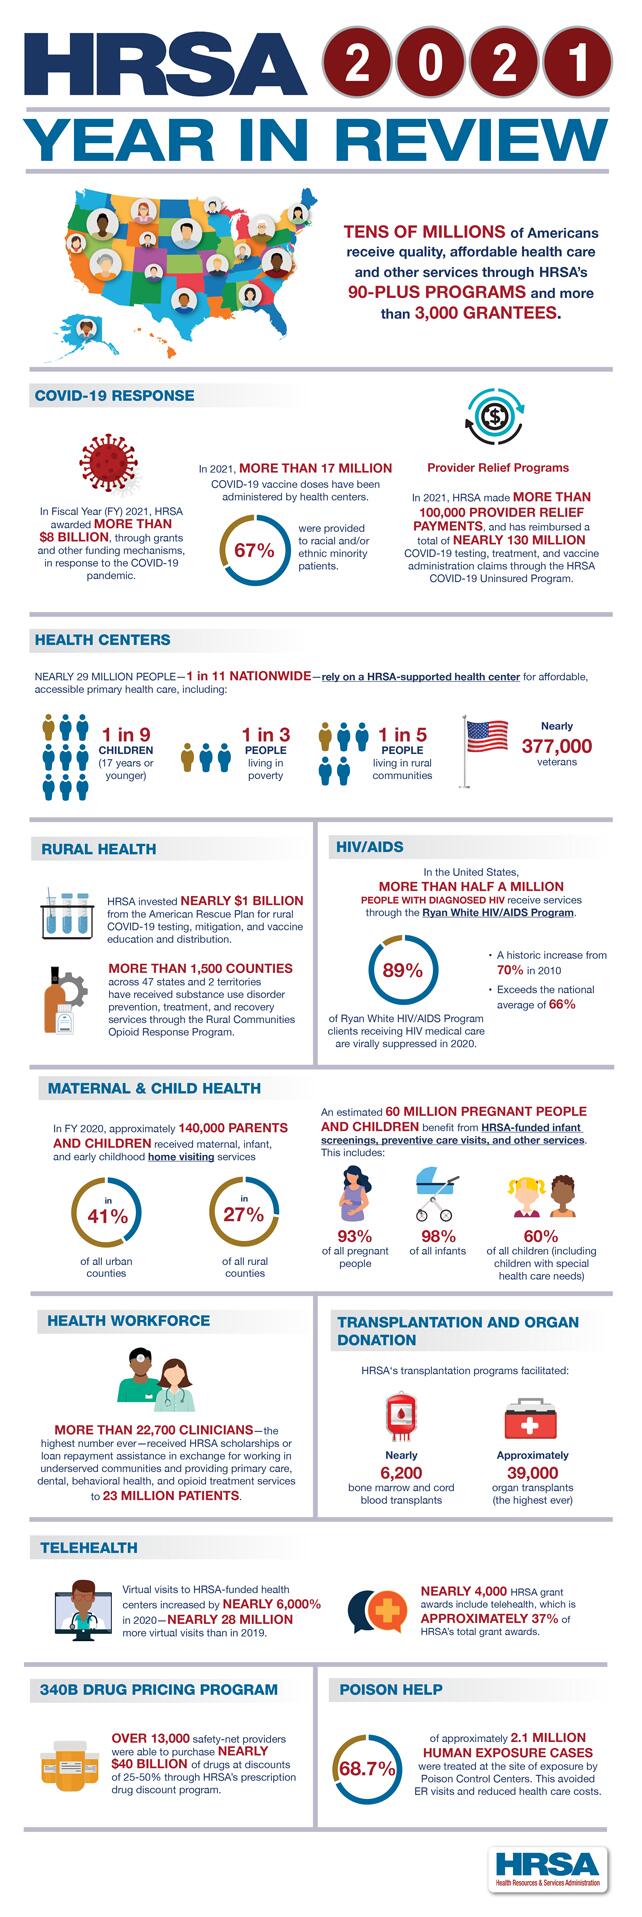 HRSA 2021 Year in Review infographic